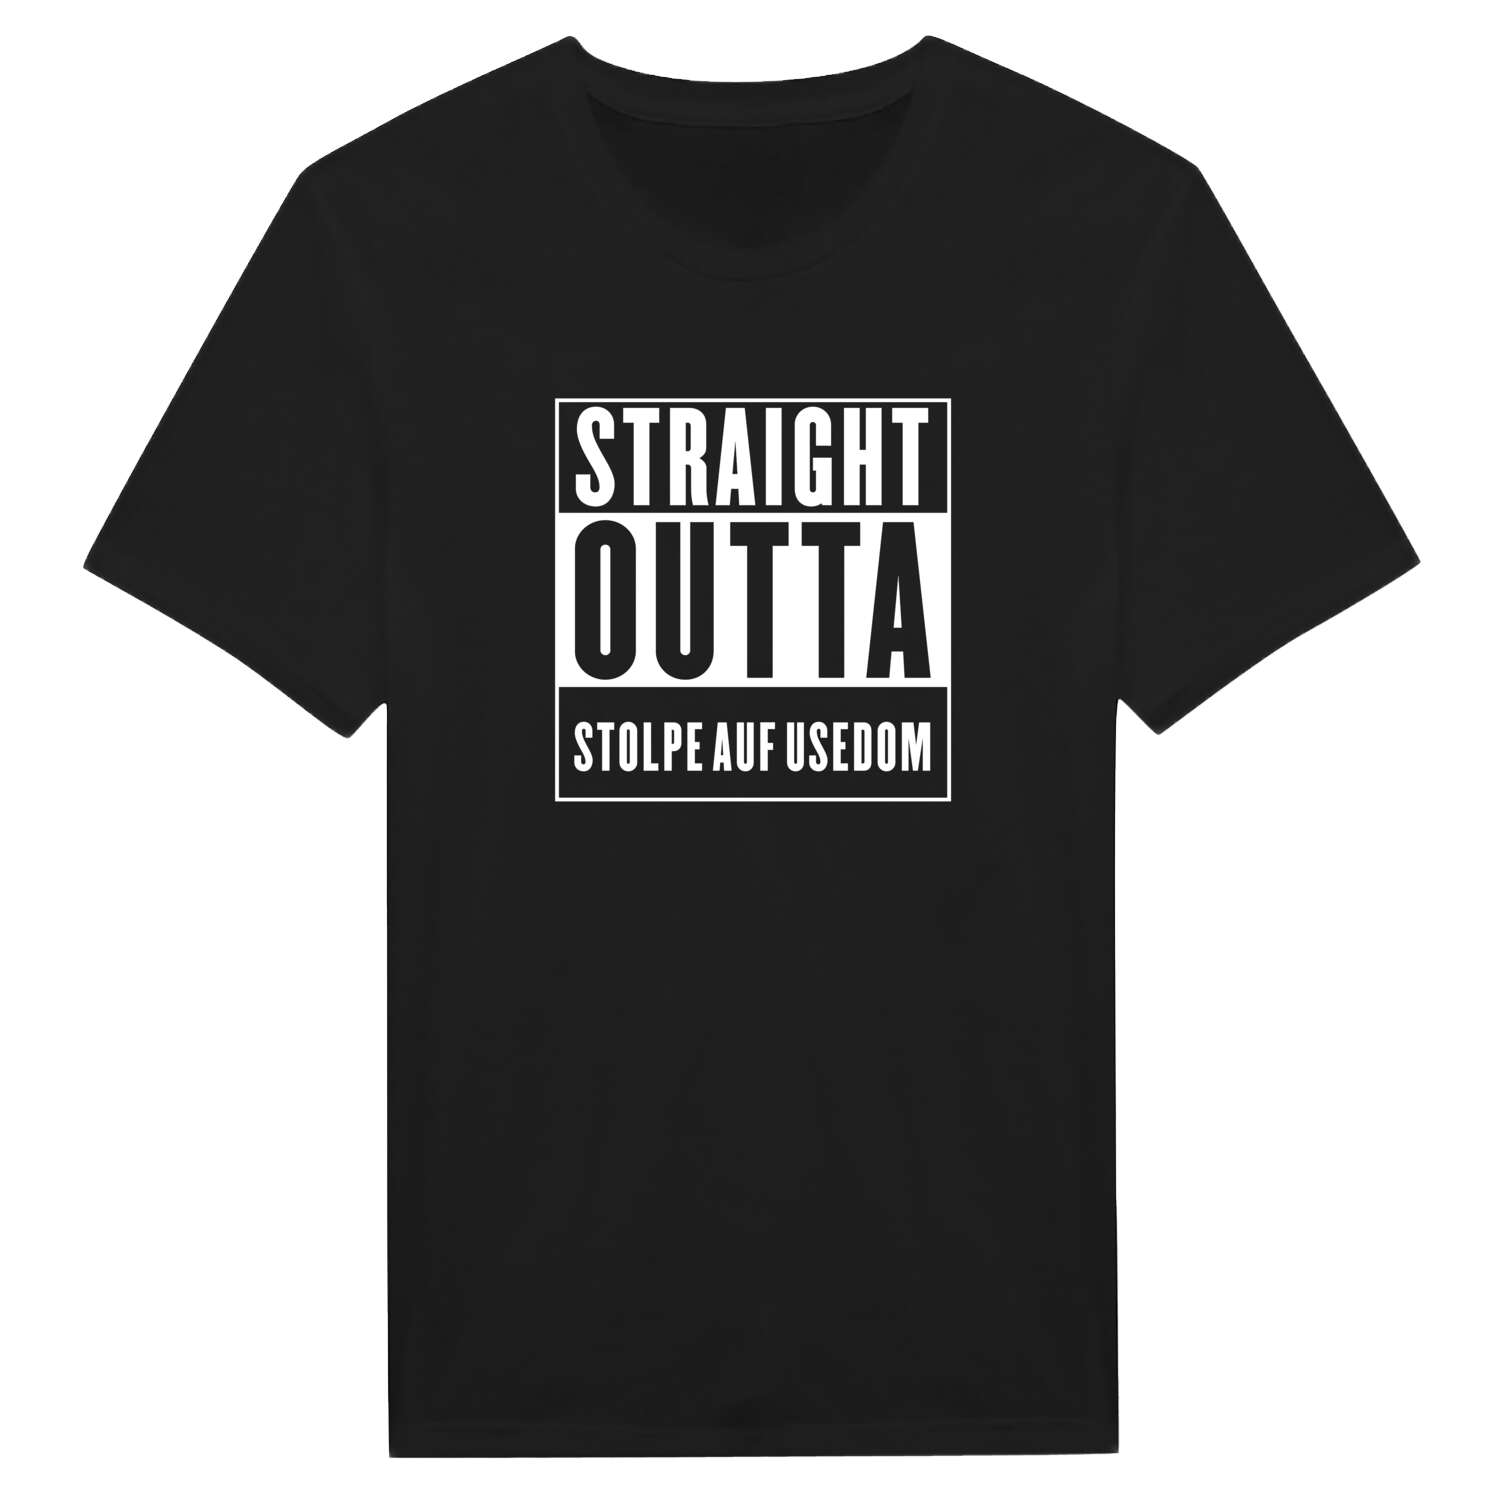 Stolpe auf Usedom T-Shirt »Straight Outta«